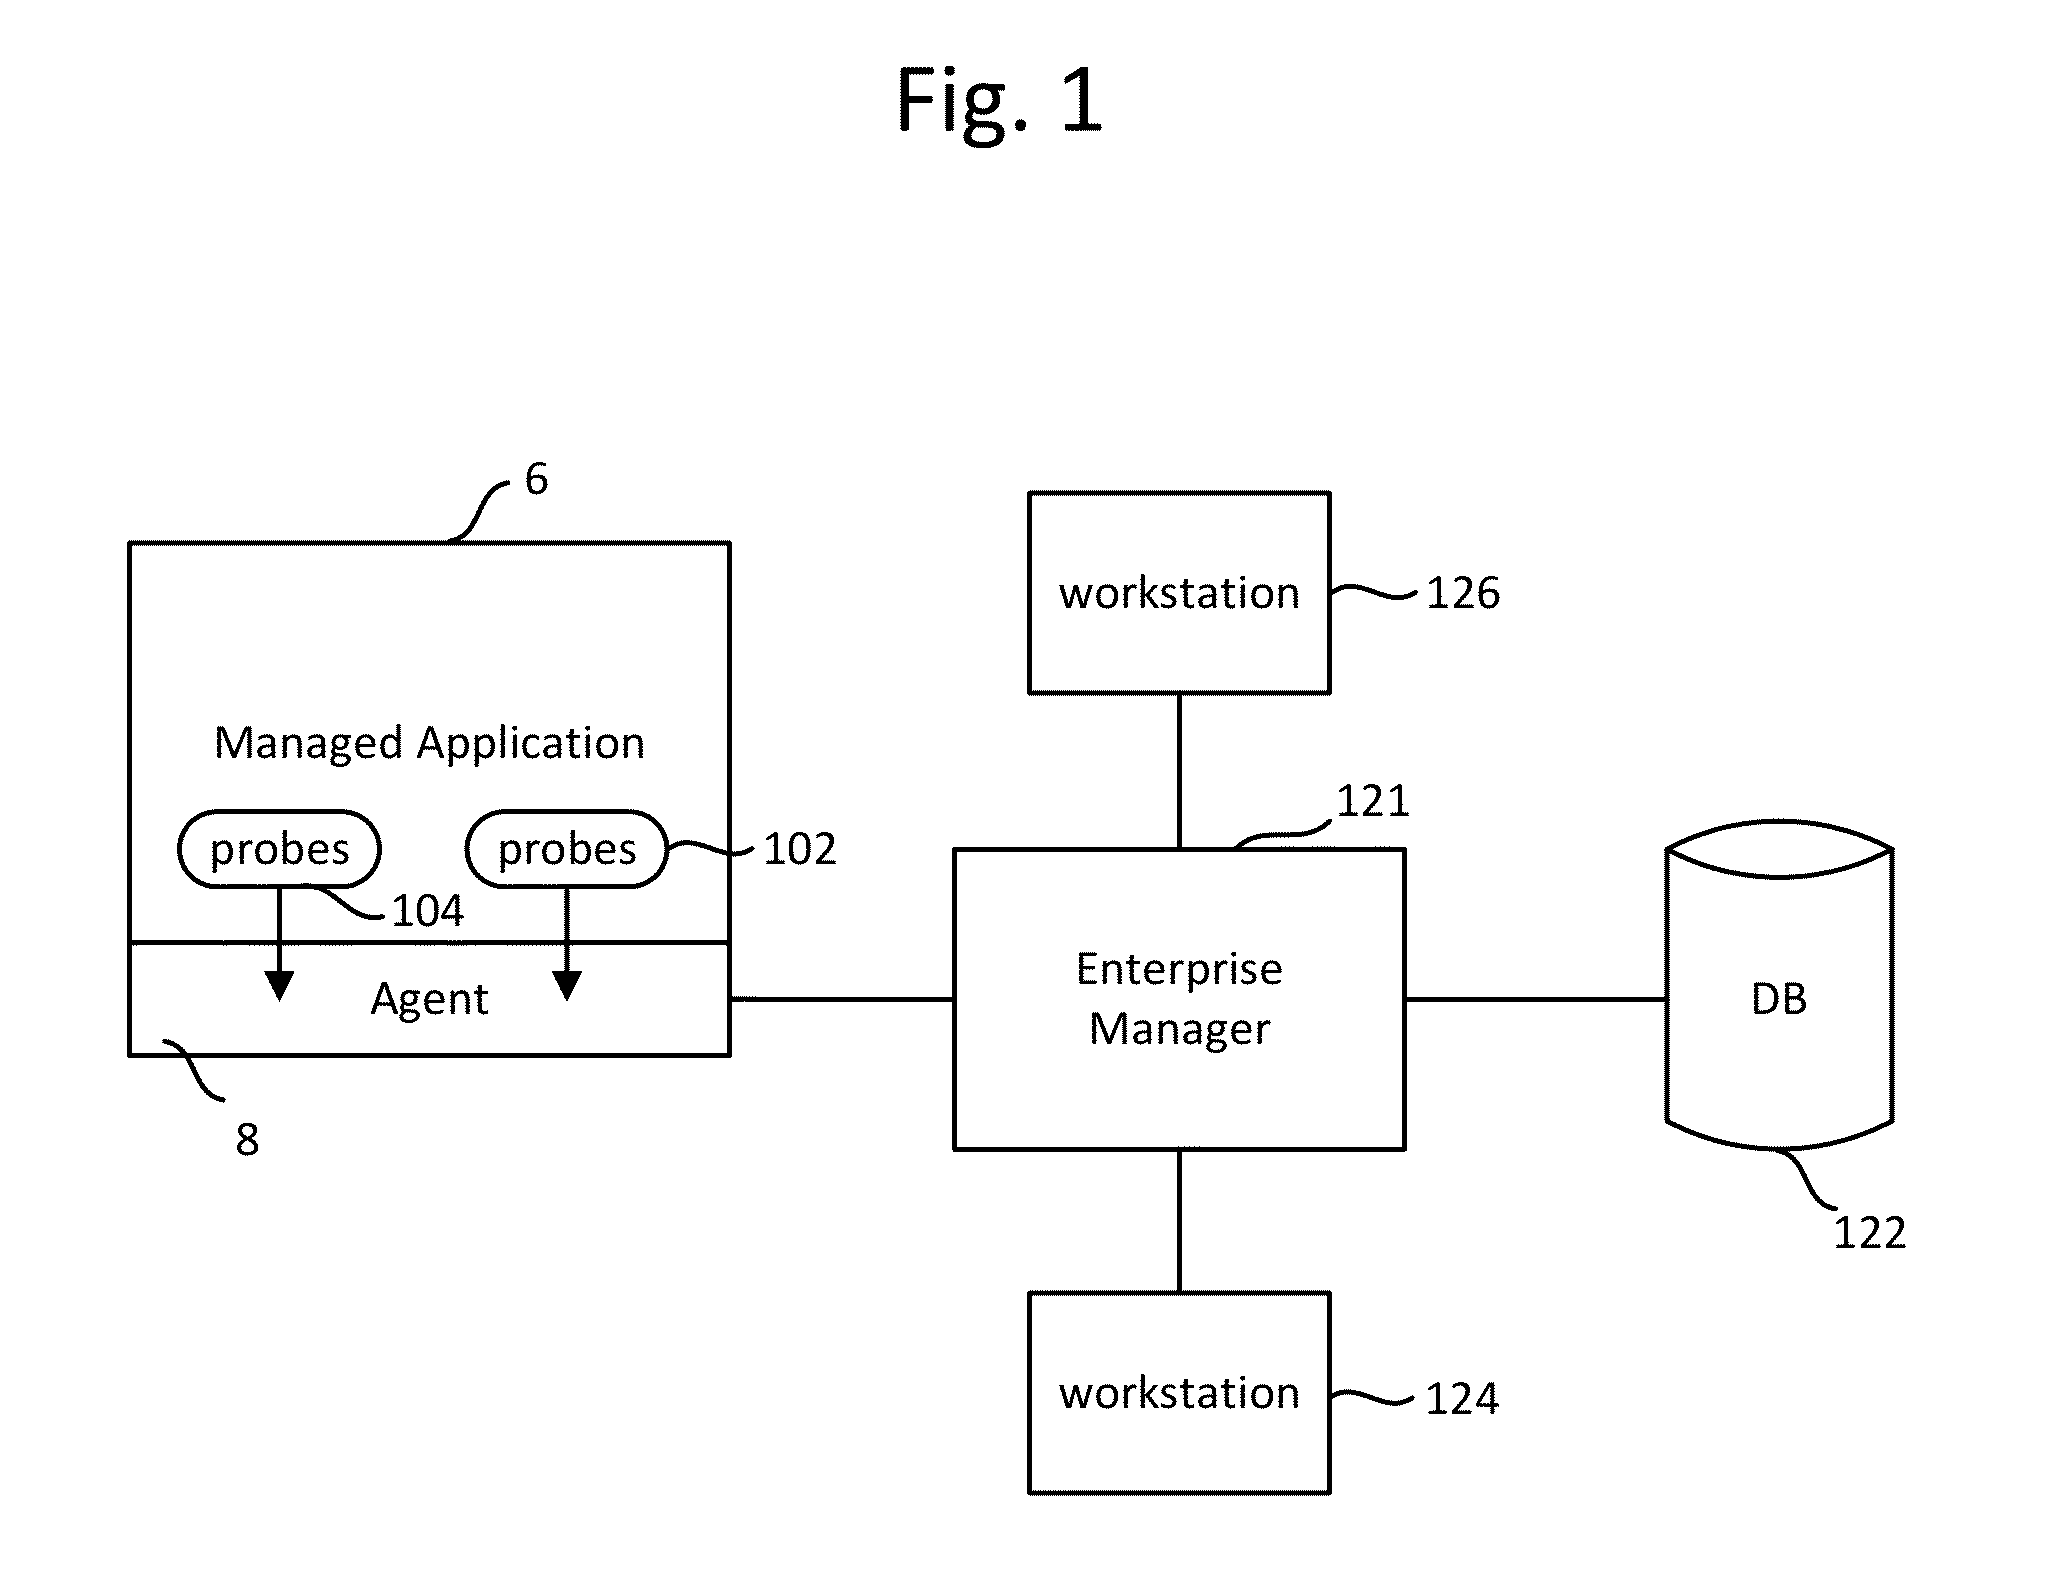 System and method to generate a transaction count using filtering